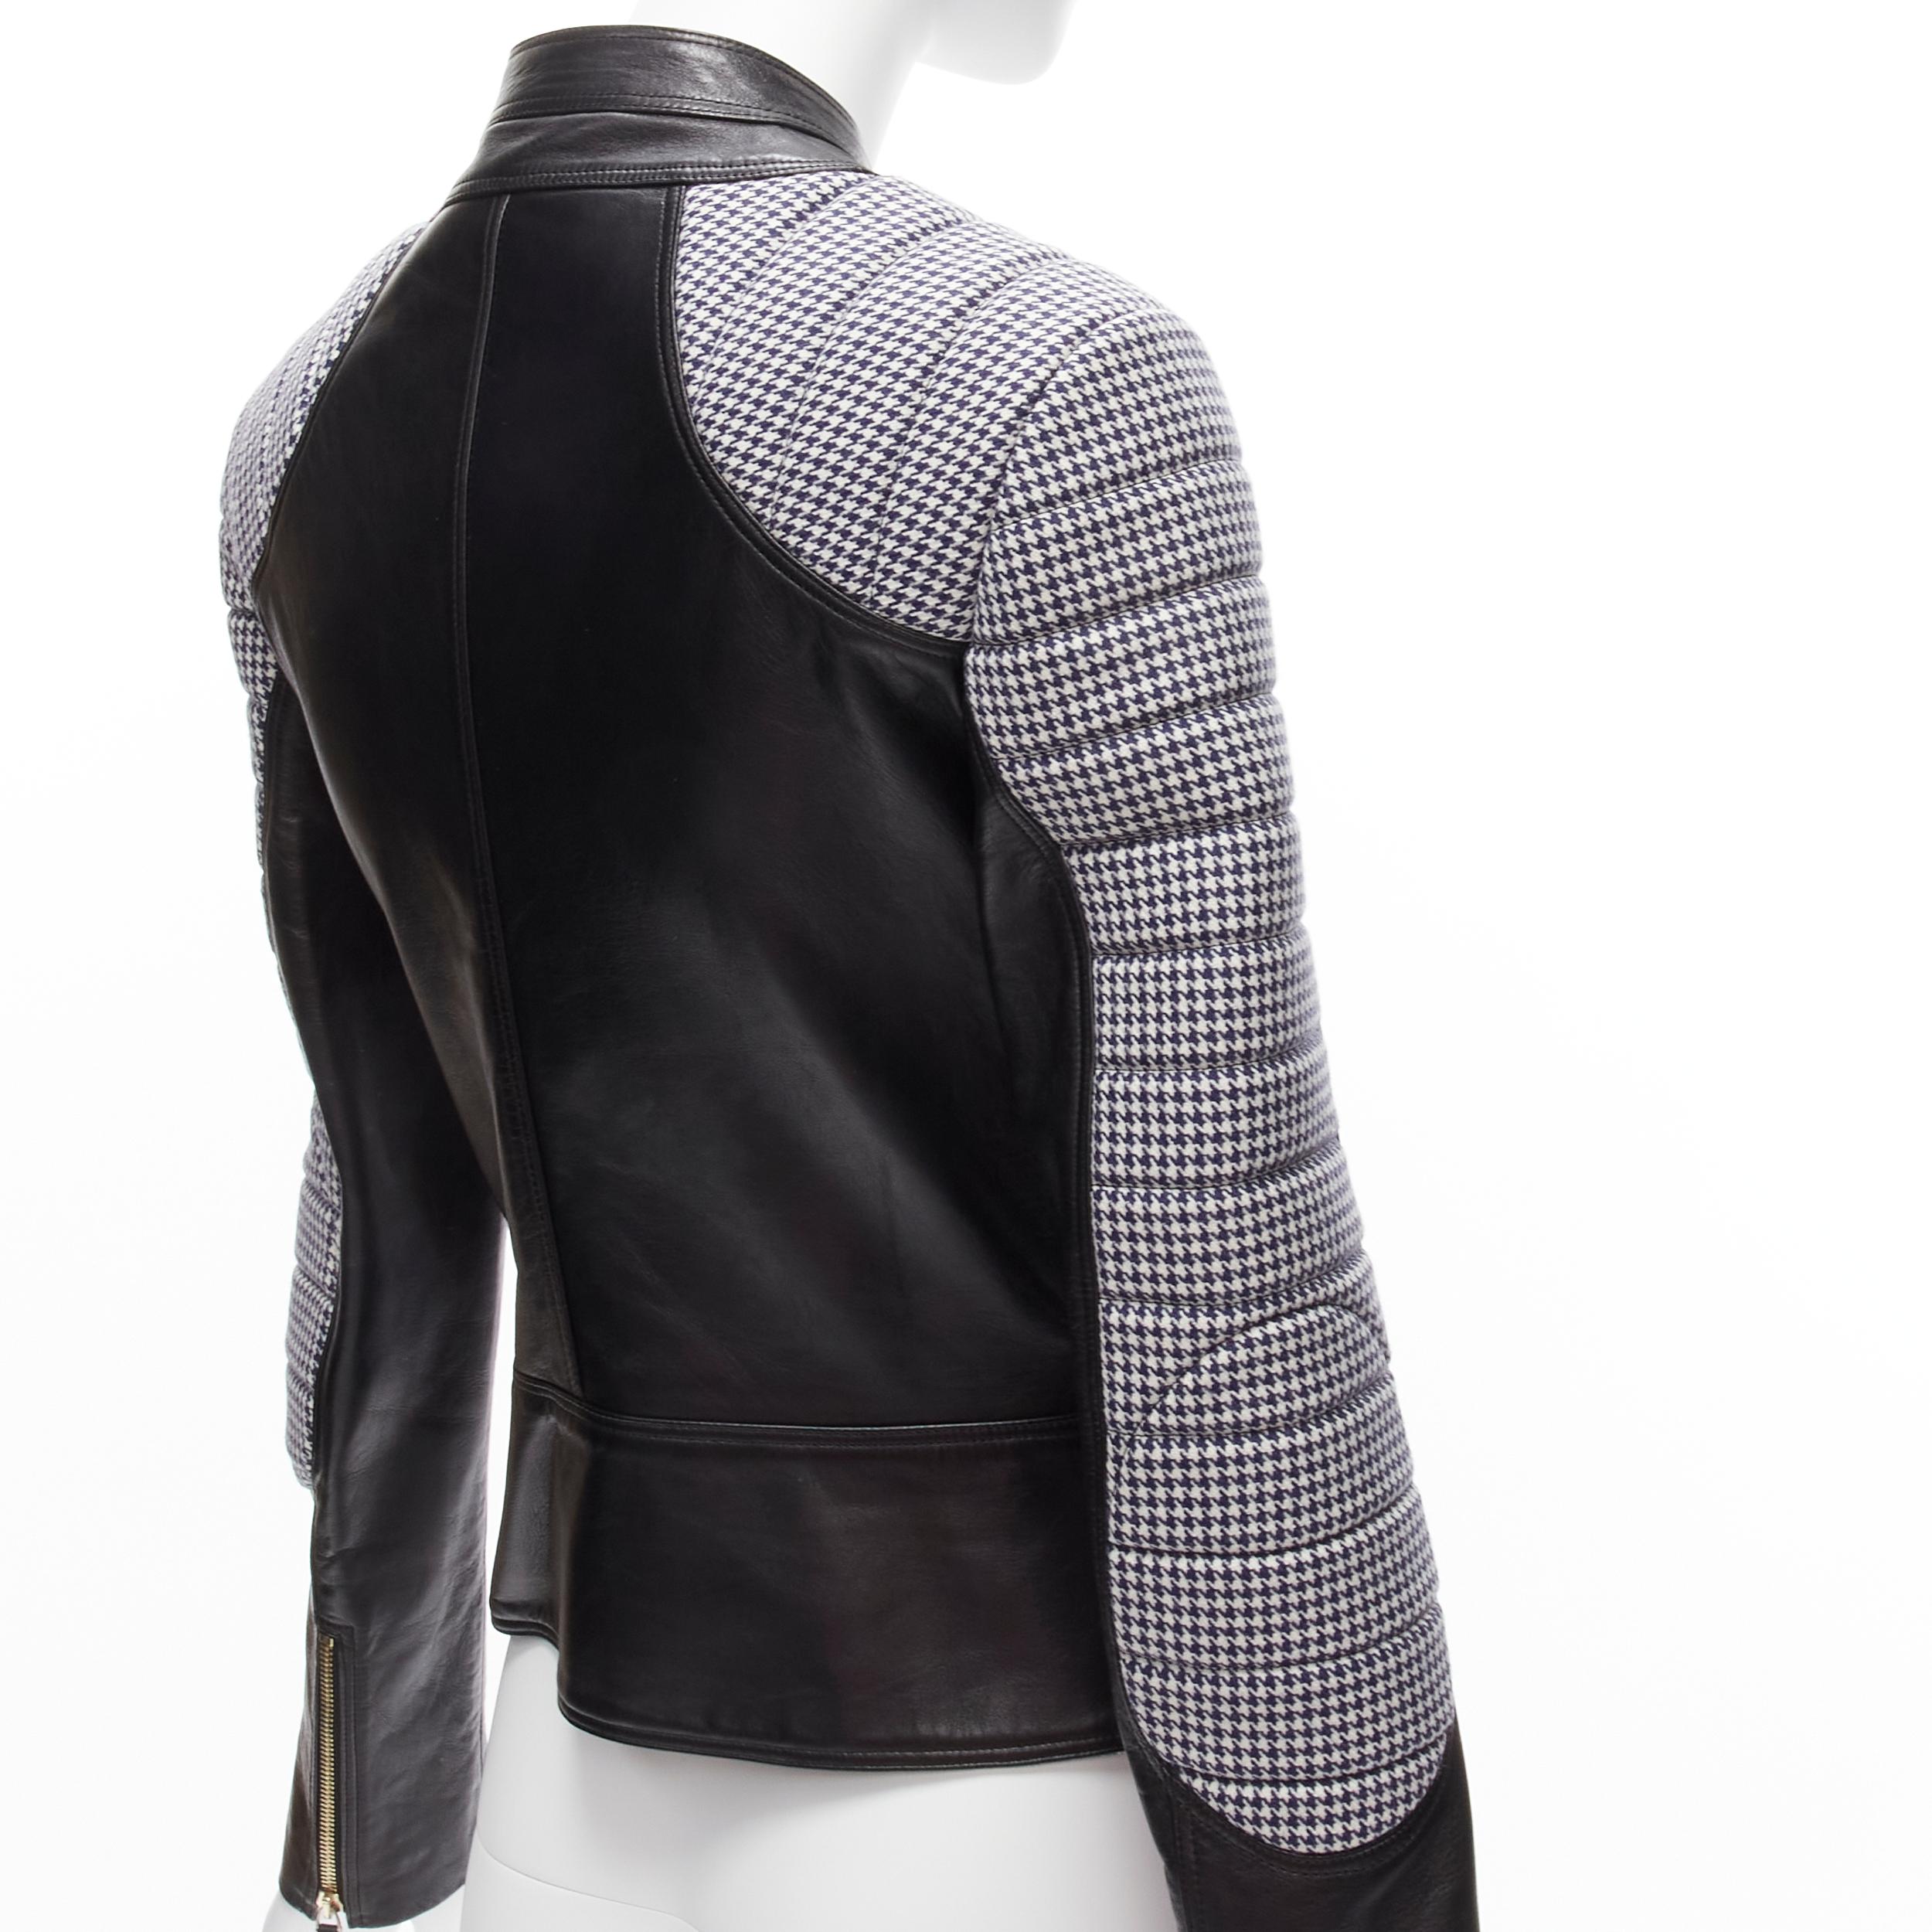 VERSACE Donatella 2012 houndstooth wool ribbed padded black leather moto biker jacket IT40 S
Reference: TGAS/D00132
Brand: Versace
Designer: Donatella Versace
Material: Leather, Fabric
Color: Black, Grey
Pattern: Houndstooth
Closure: Zip
Lining: